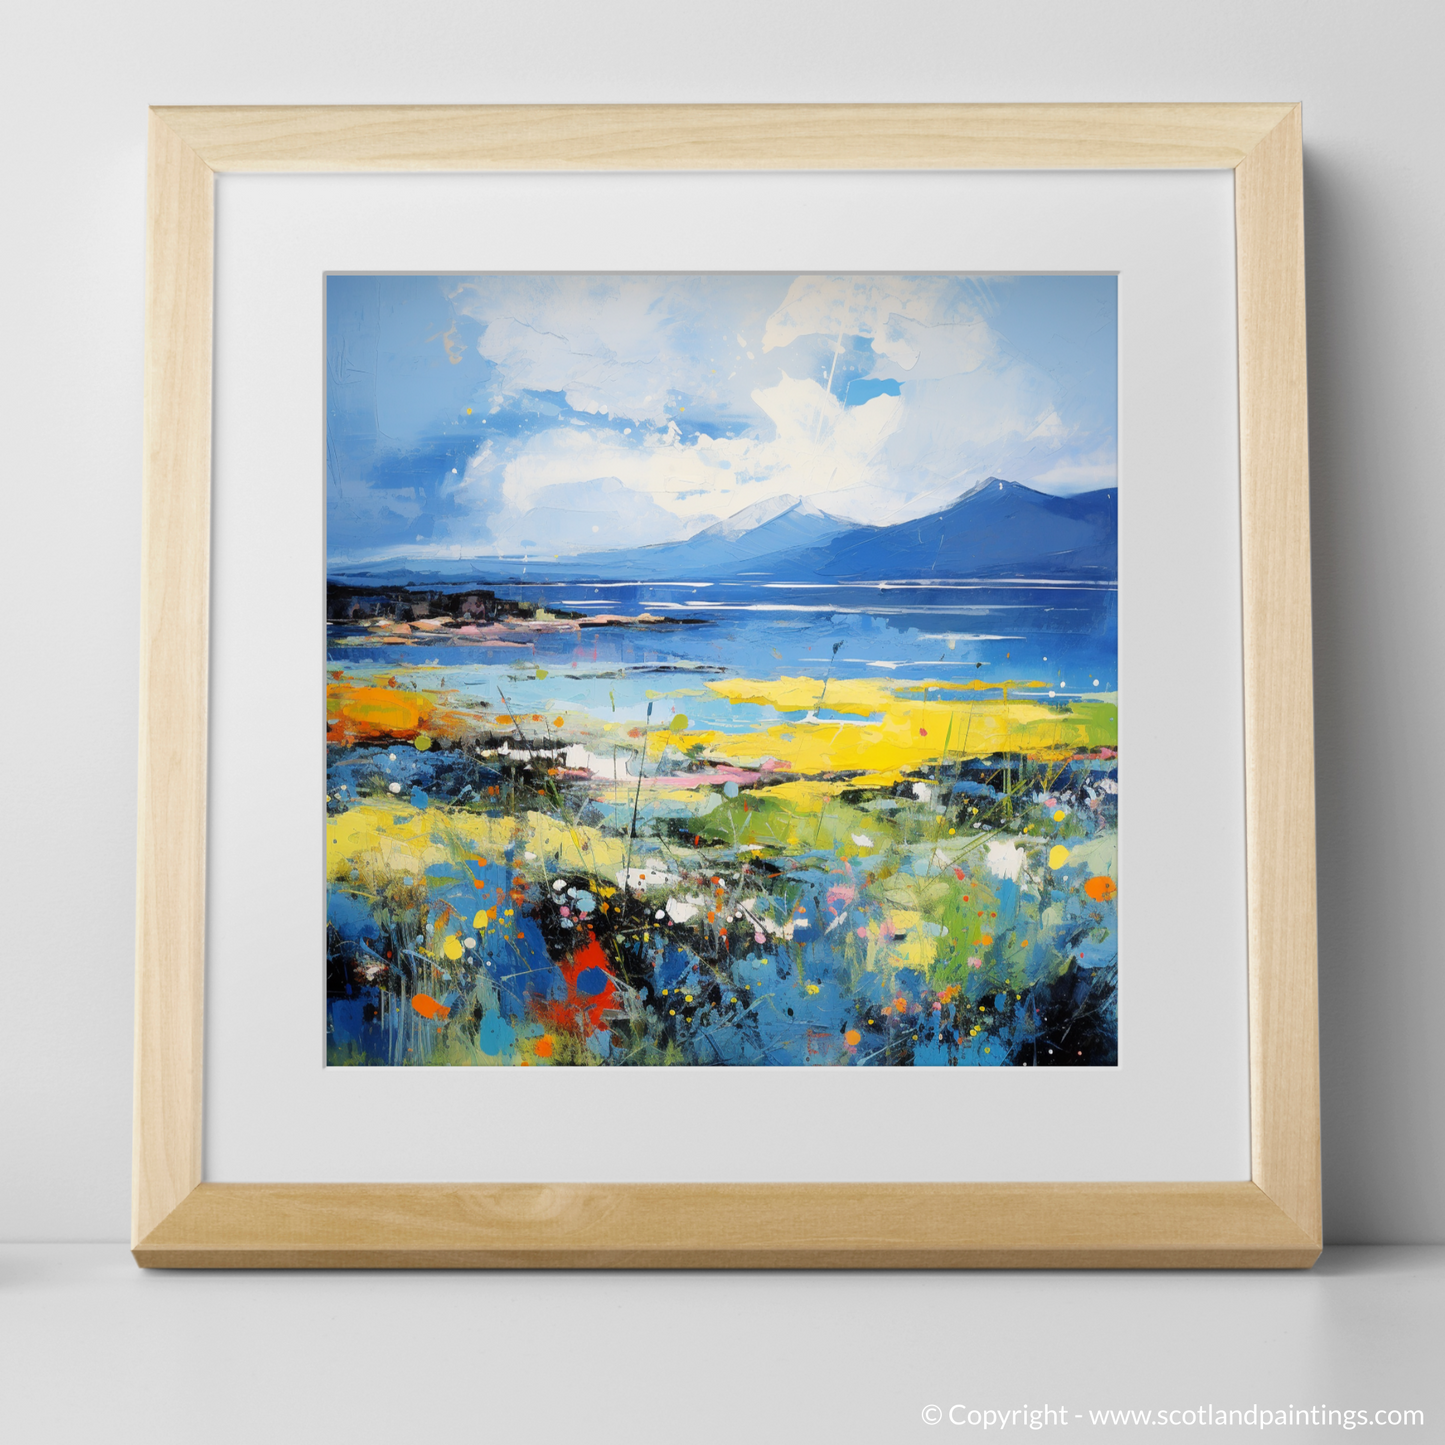 Painting and Art Print of Isle of Arran, Firth of Clyde in summer. Abstract Arran Summerscape.